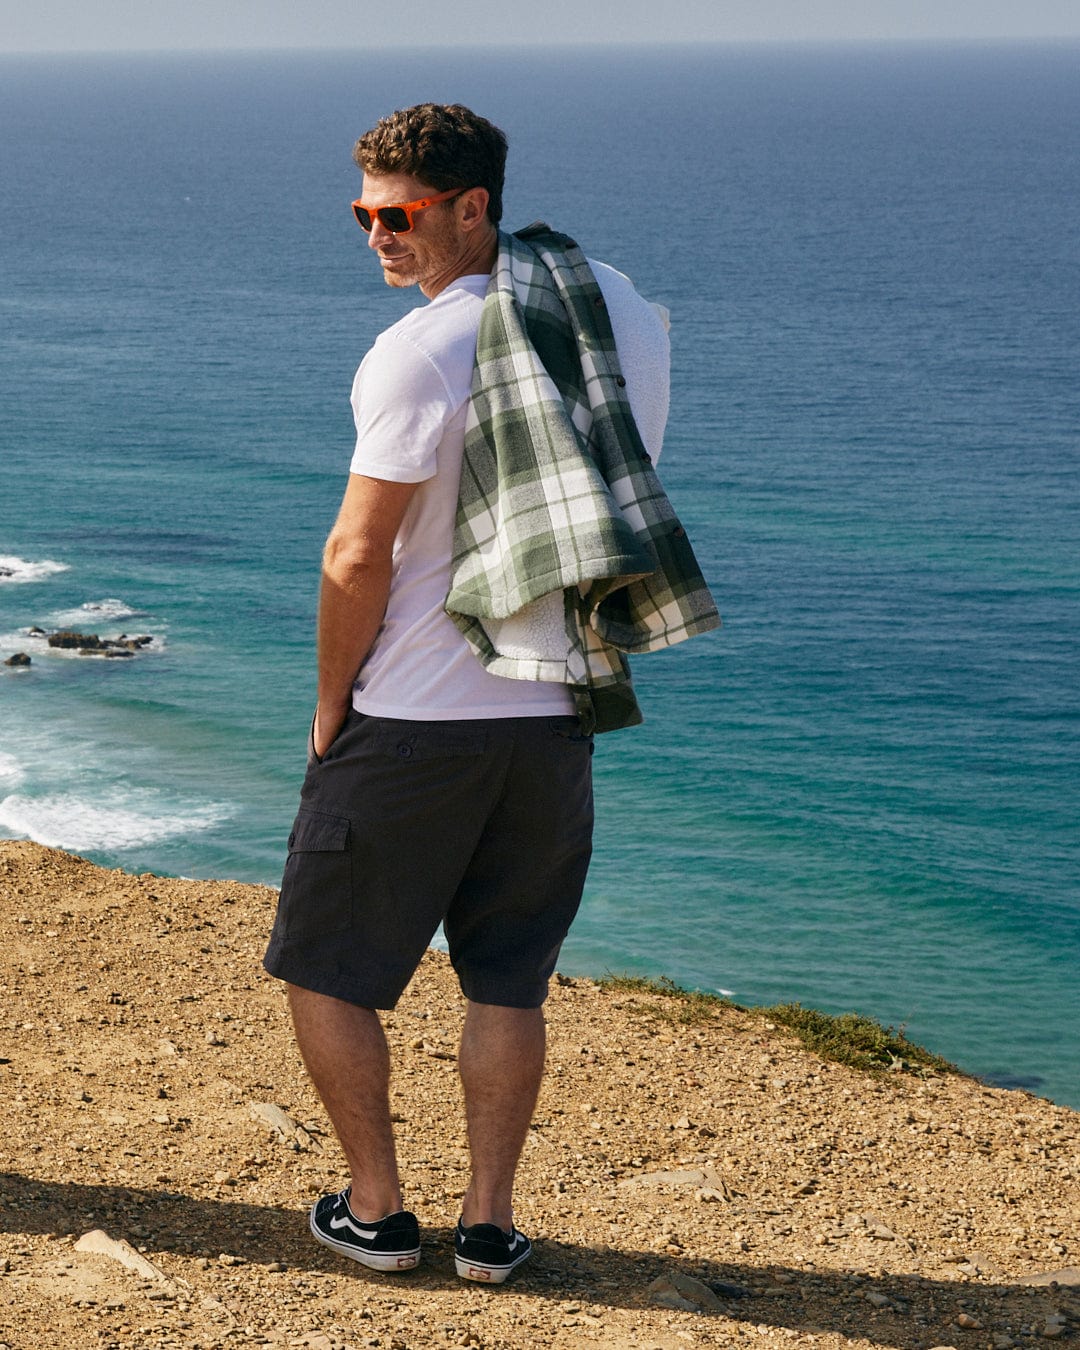 Man with a Penwith II - Mens Cargo Shorts - Dark Grey from Saltrock over his shoulder standing on a coastal cliff overlooking the sea.